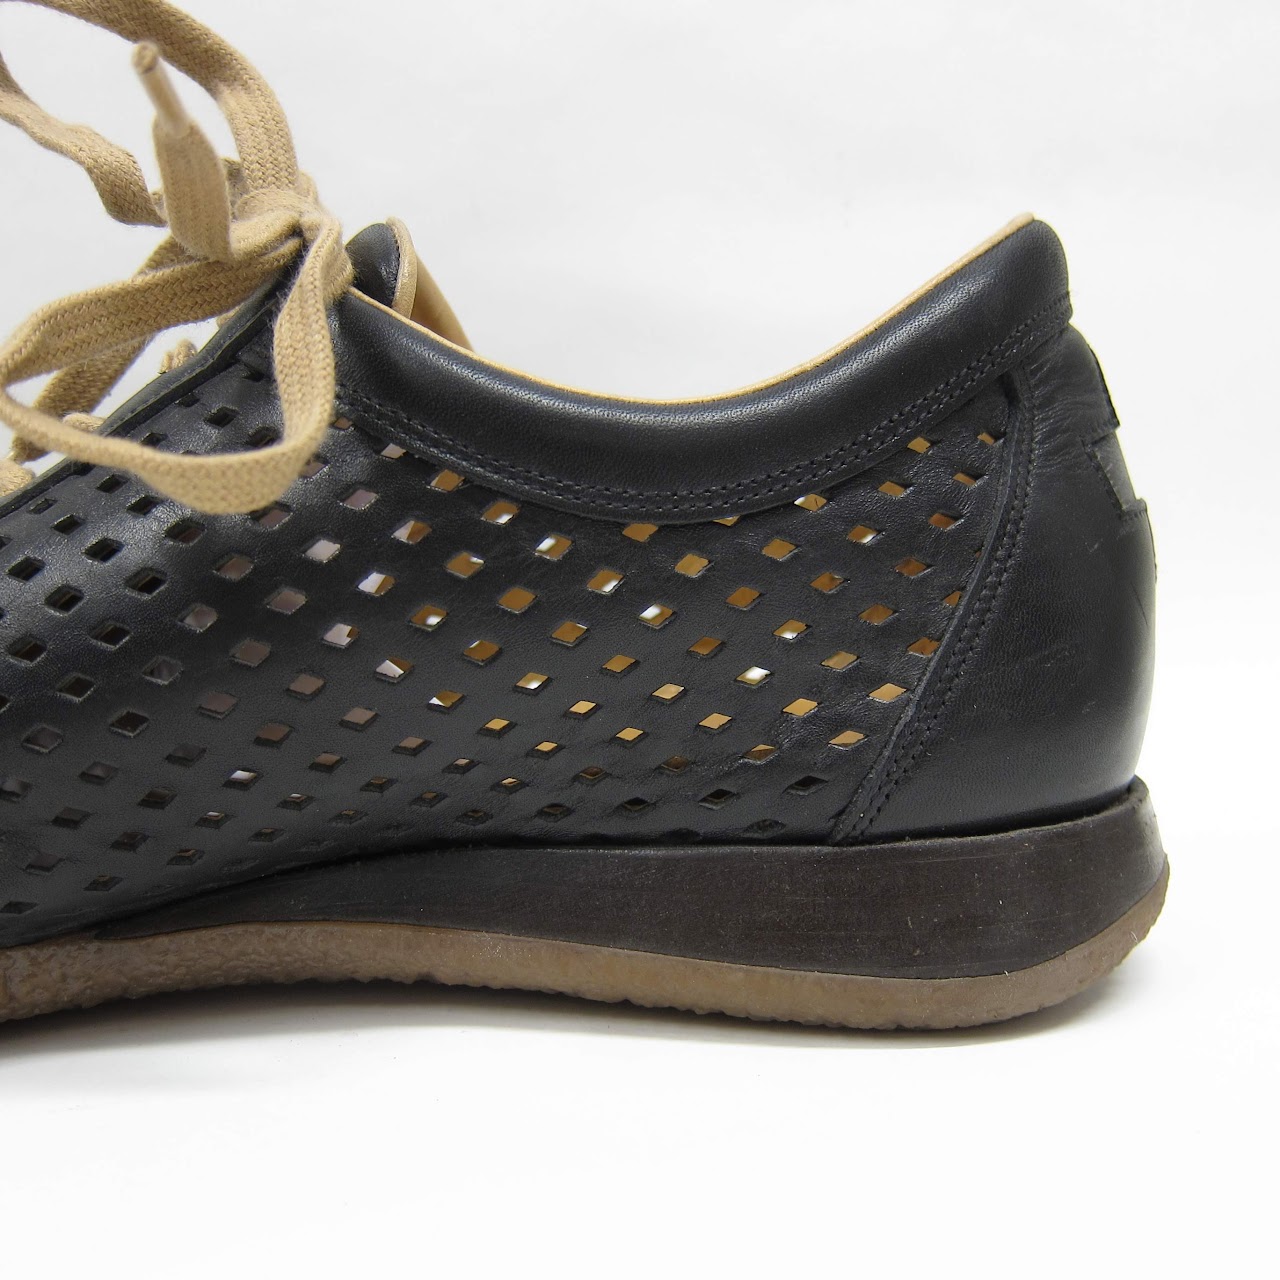 Bally Perforated Sneakers